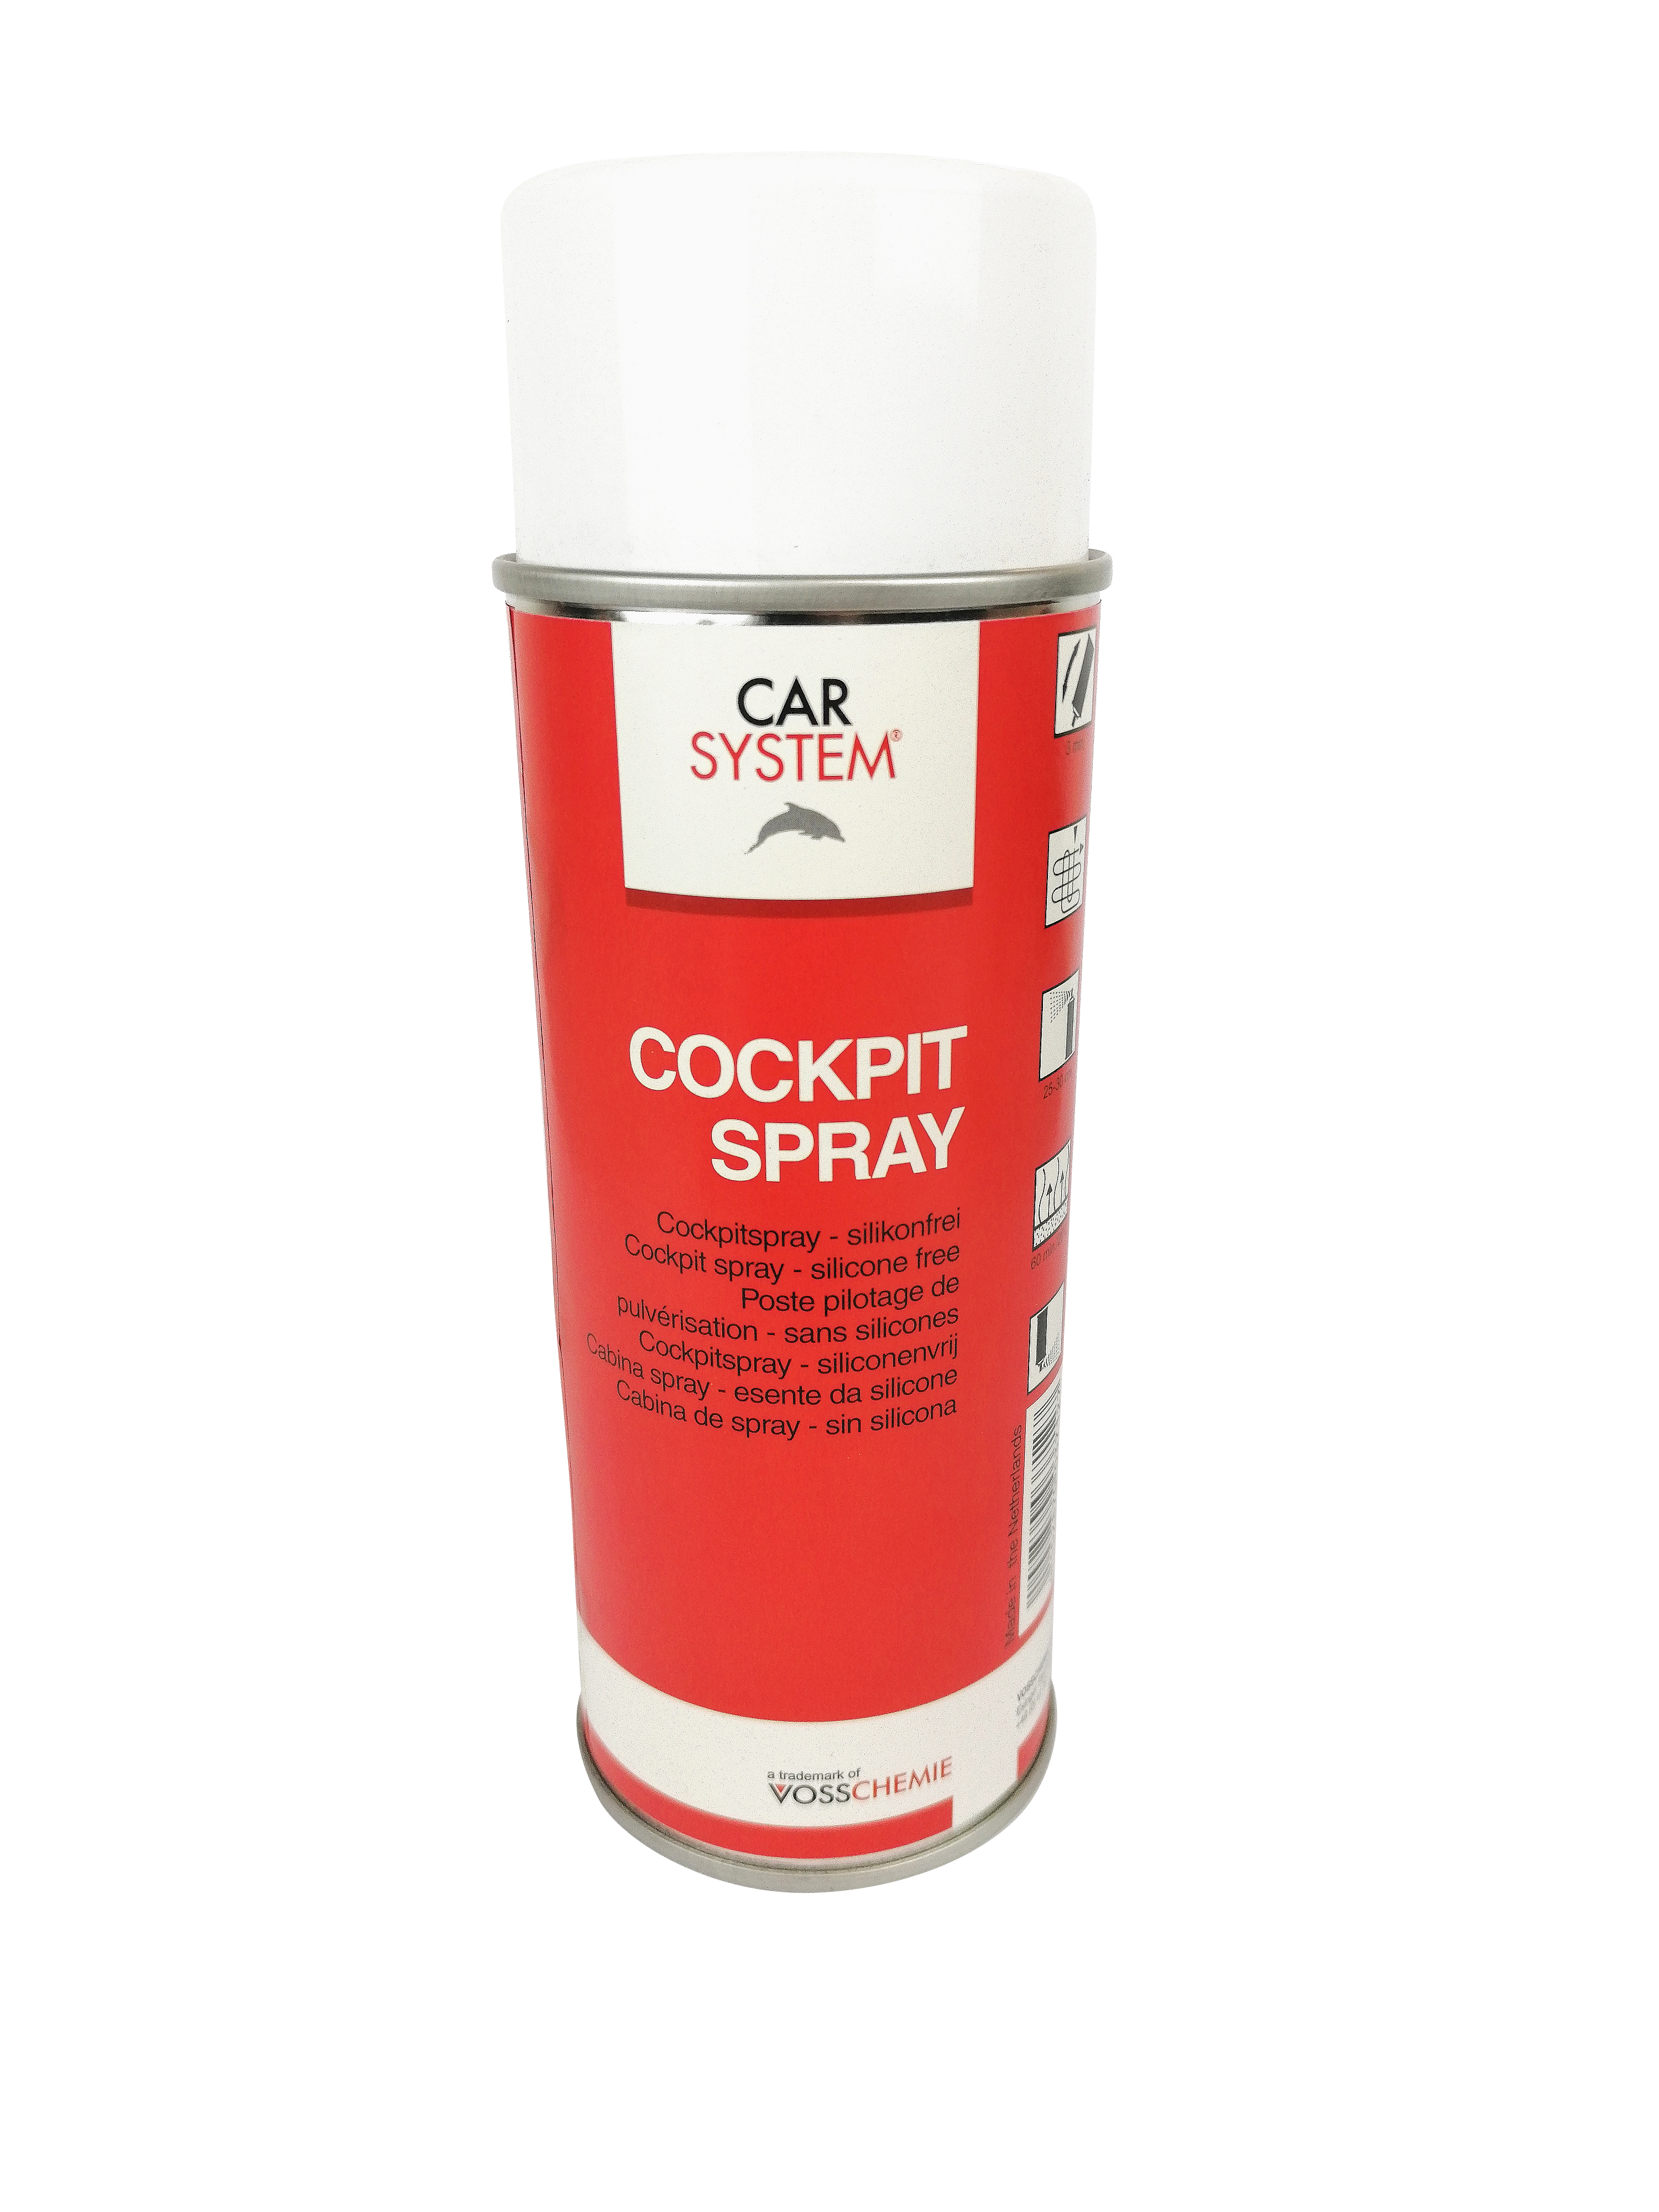 Cleaning the bicycle, boat or inside of a car with cockpit spray